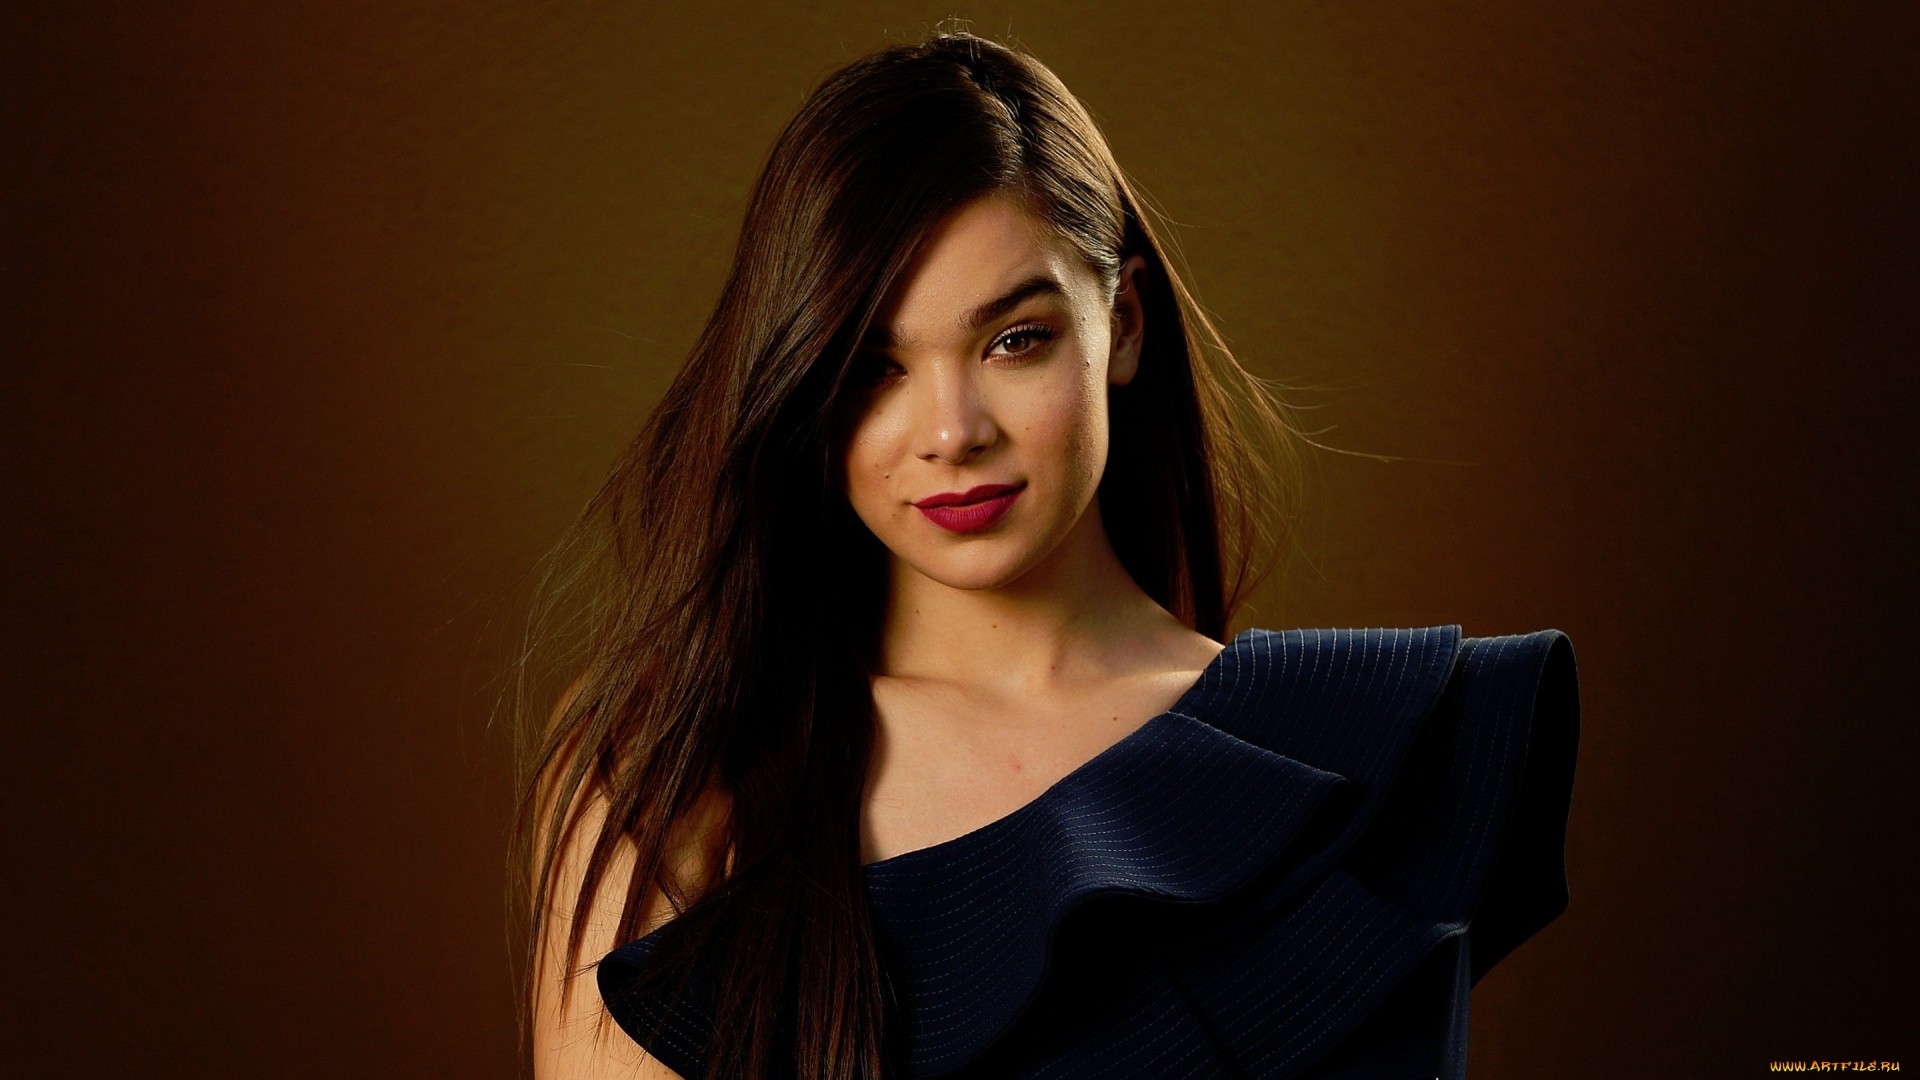 Actress Hailee Steinfeld 2021 Wallpapers